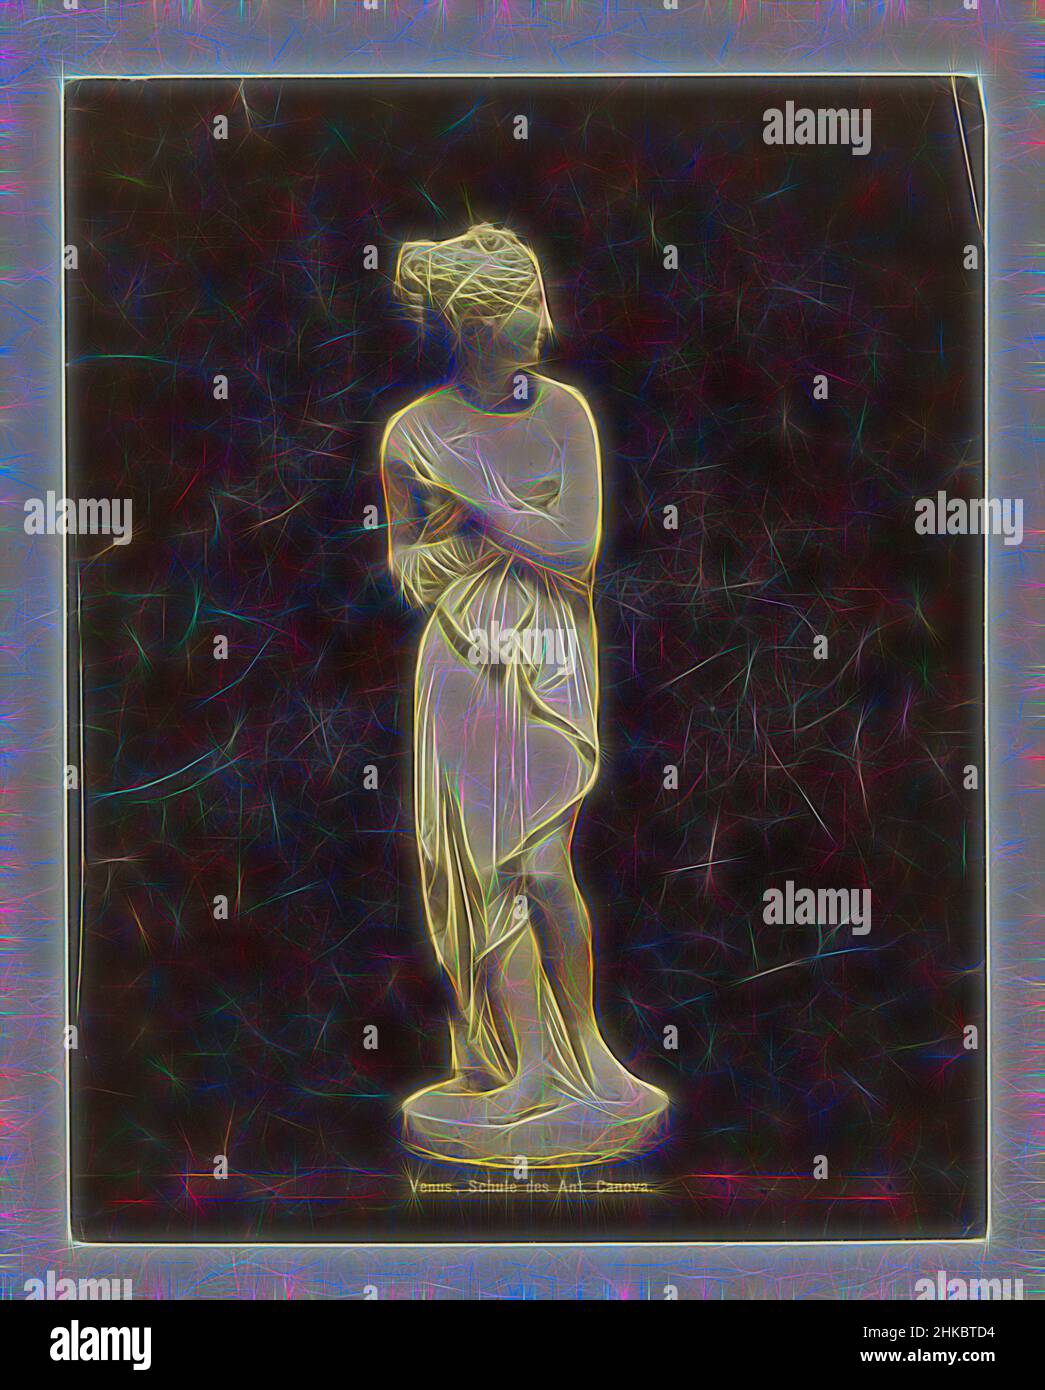 Inspired by Image of Venus, Venus, Schule des Ant. Canova., c. 1875 - c. 1900, albumen print, height 253 mm × width 201 mm, Reimagined by Artotop. Classic art reinvented with a modern twist. Design of warm cheerful glowing of brightness and light ray radiance. Photography inspired by surrealism and futurism, embracing dynamic energy of modern technology, movement, speed and revolutionize culture Stock Photo